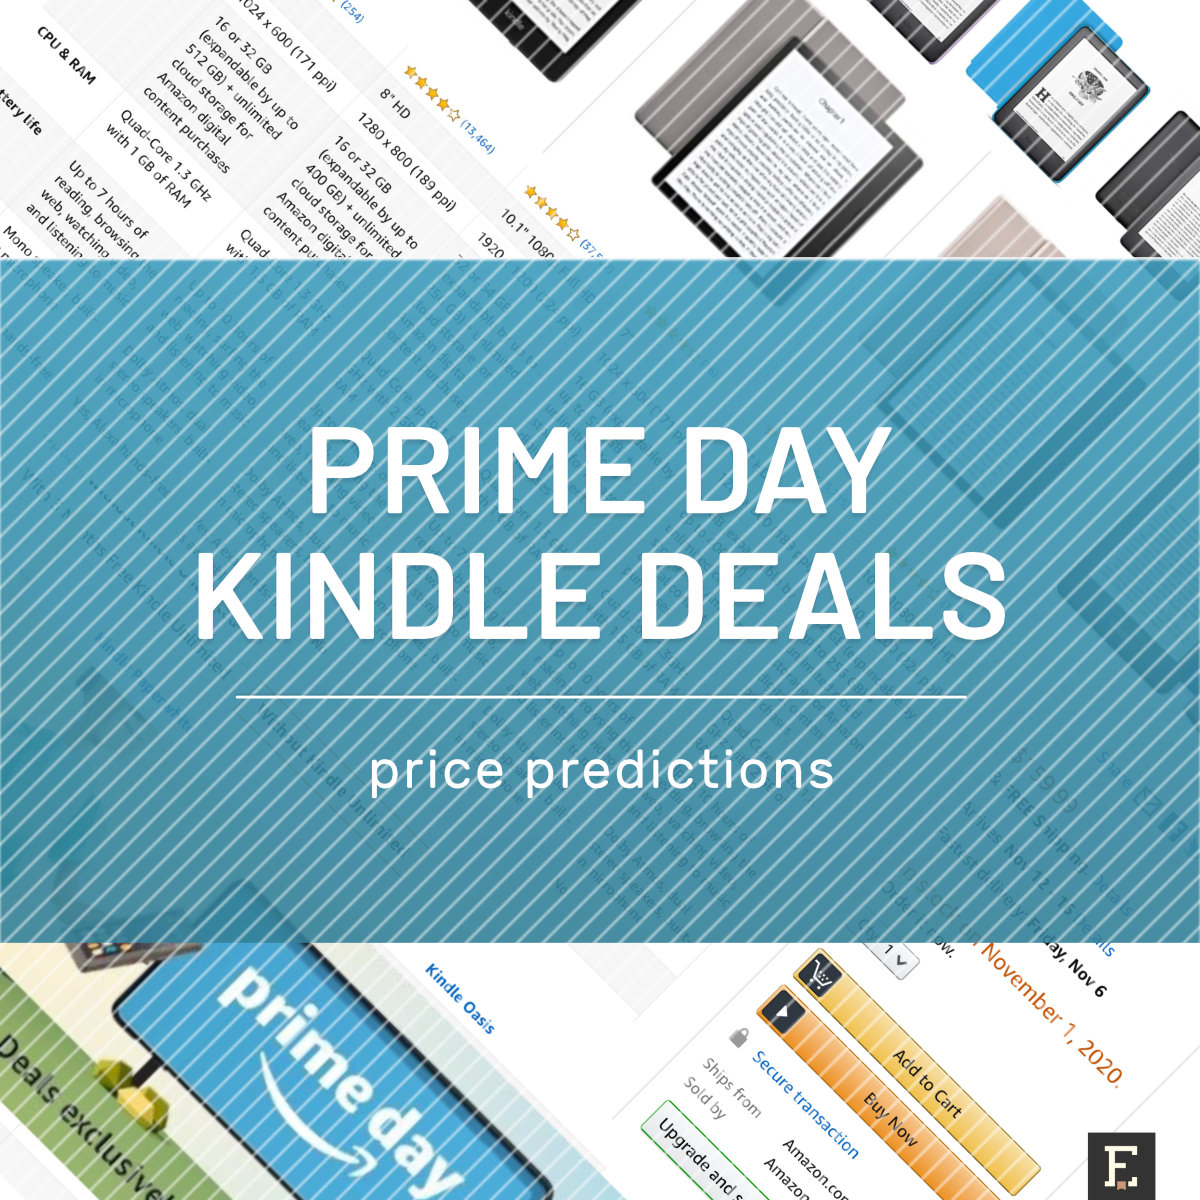 Prime Day 2022 Kindle deal price predictions